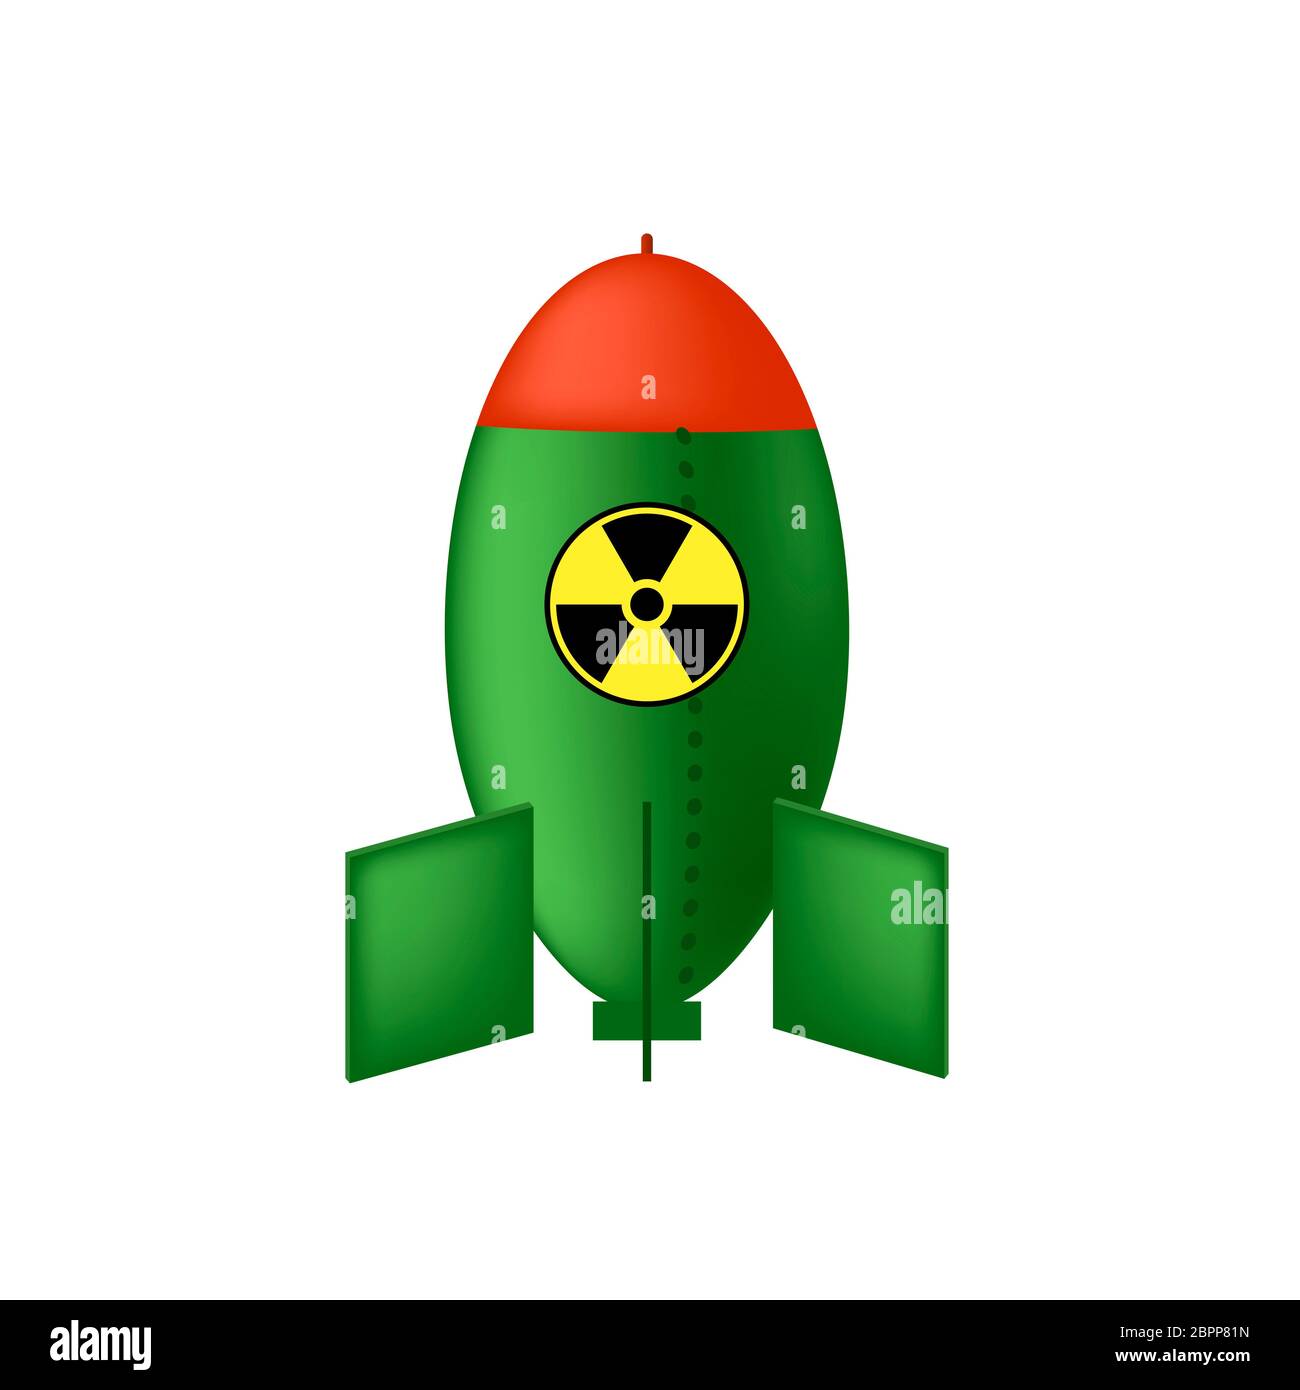 Green Atomic Bomb with Radiation Sign Isolated on White Background. Nuclear Rocket. Stock Photo